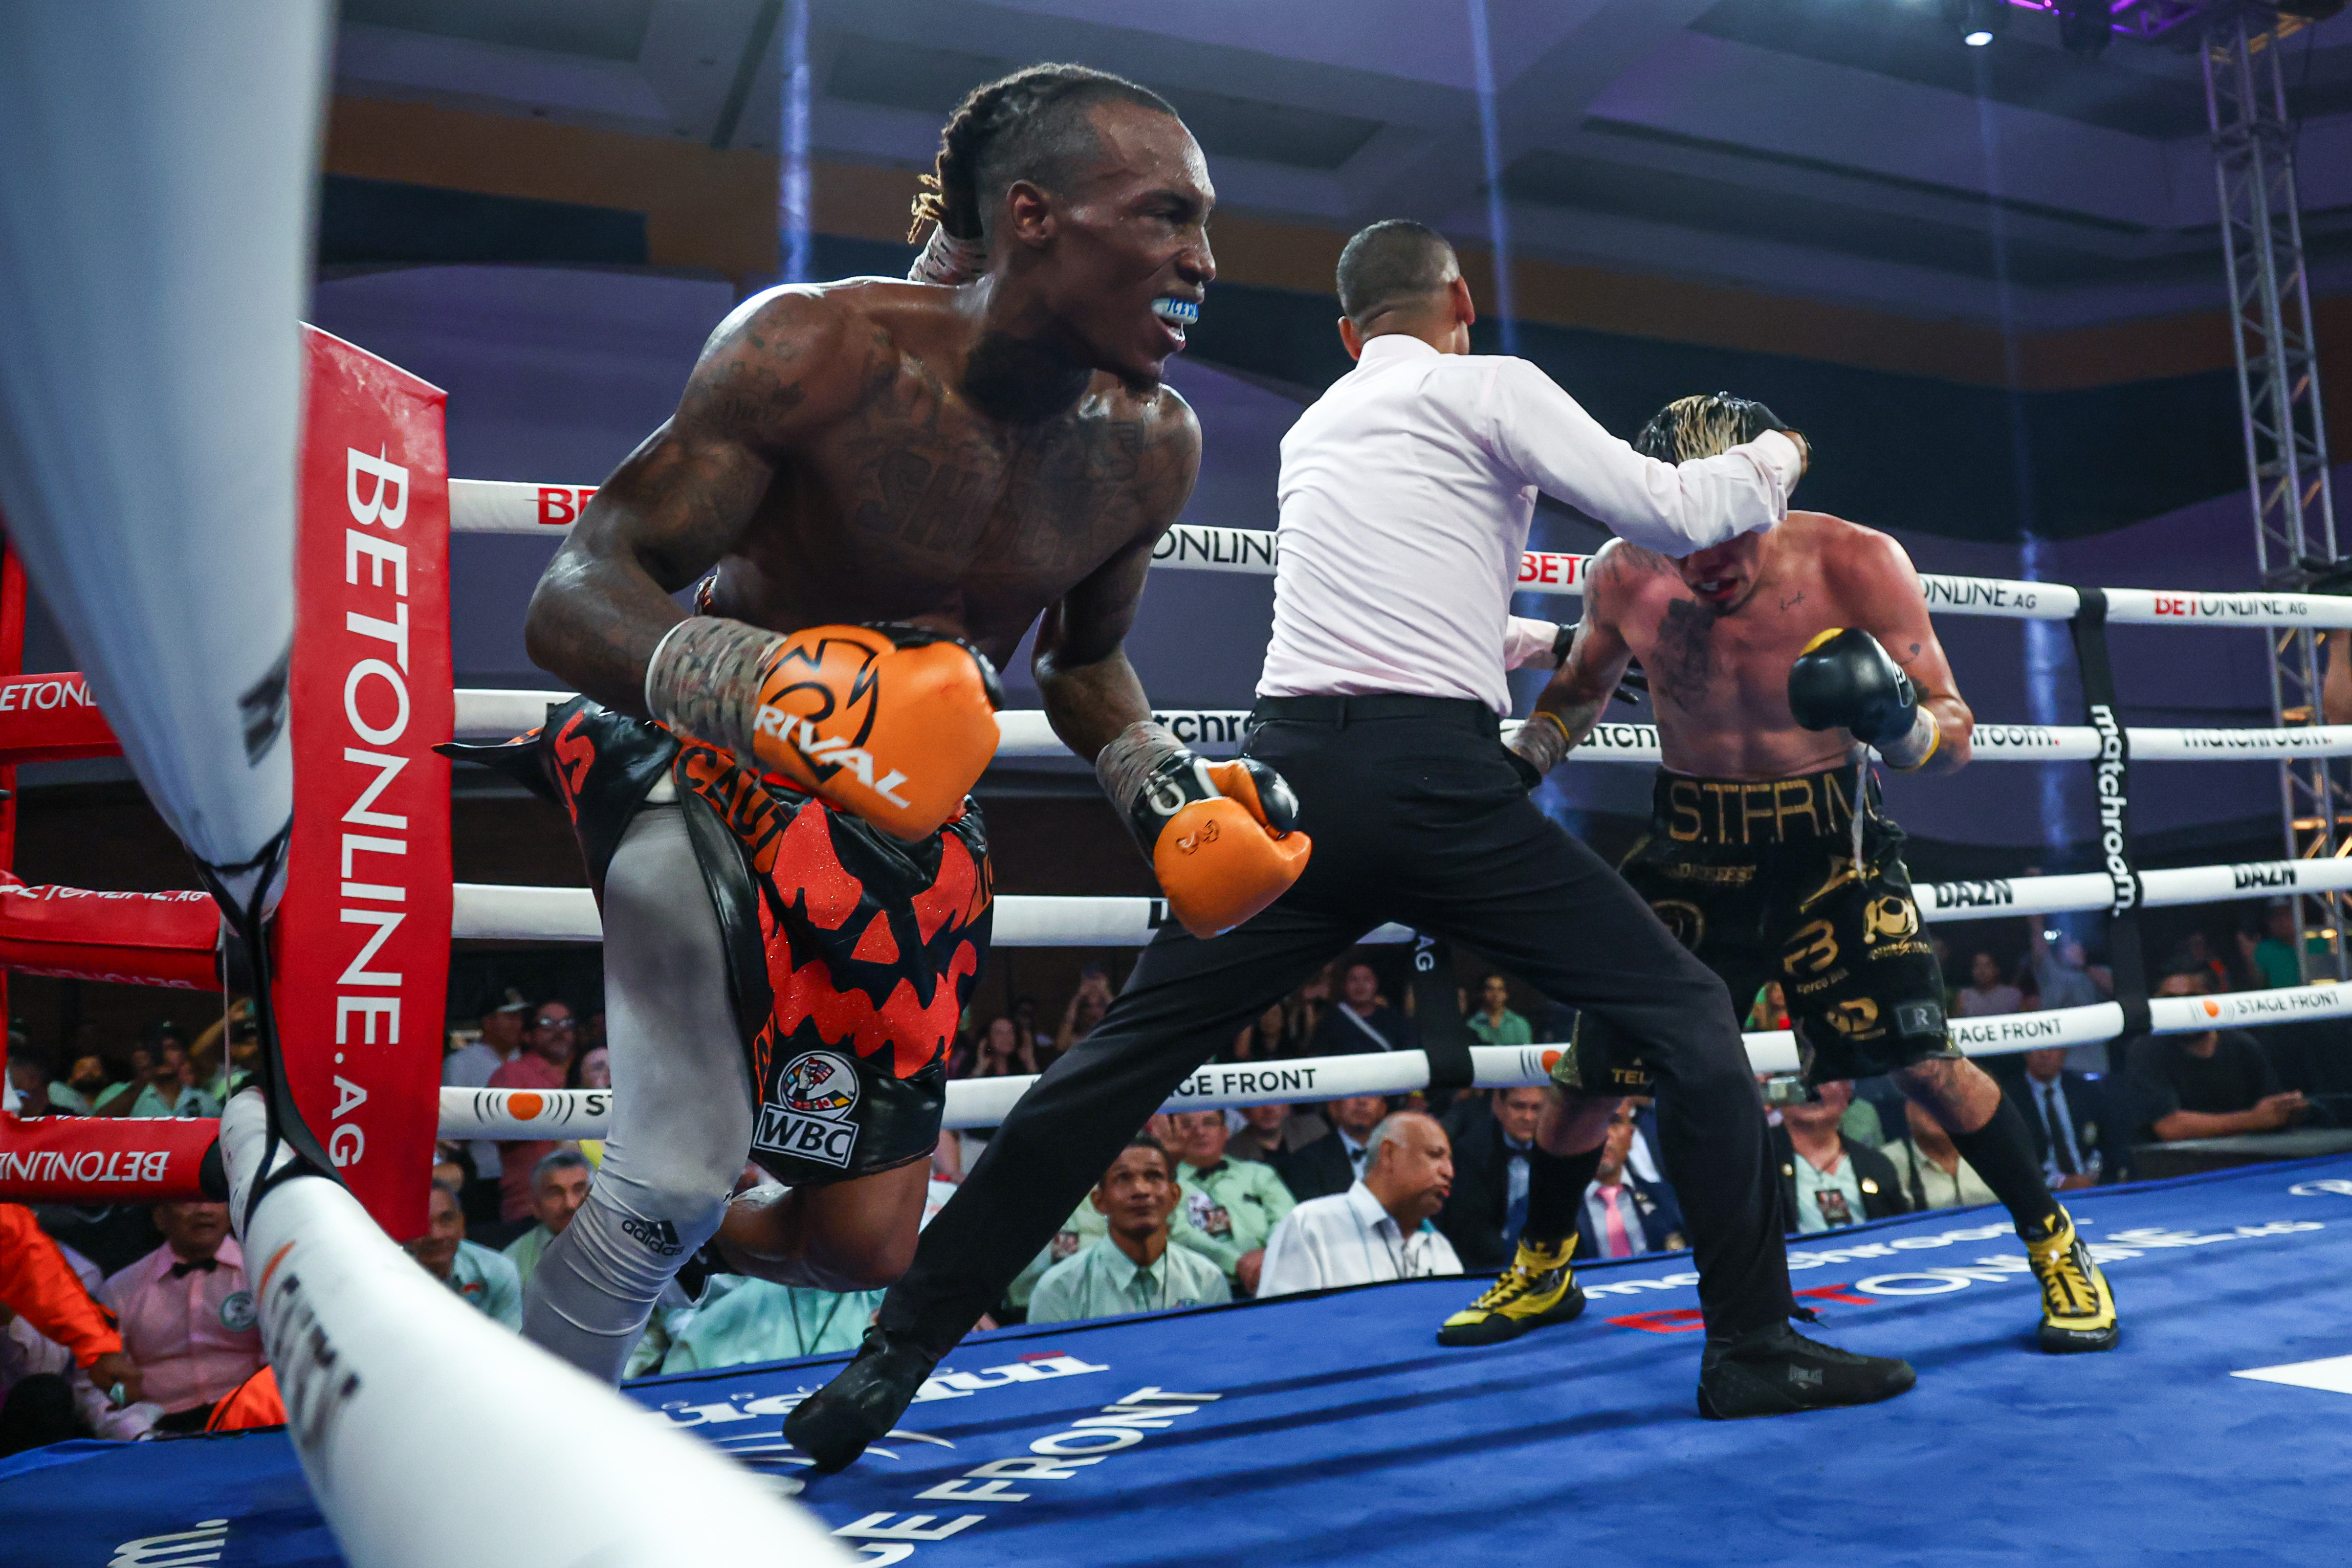 O’Shaquie Foster pulled the rabbit out of the hat with a late turnaround to retain his belt